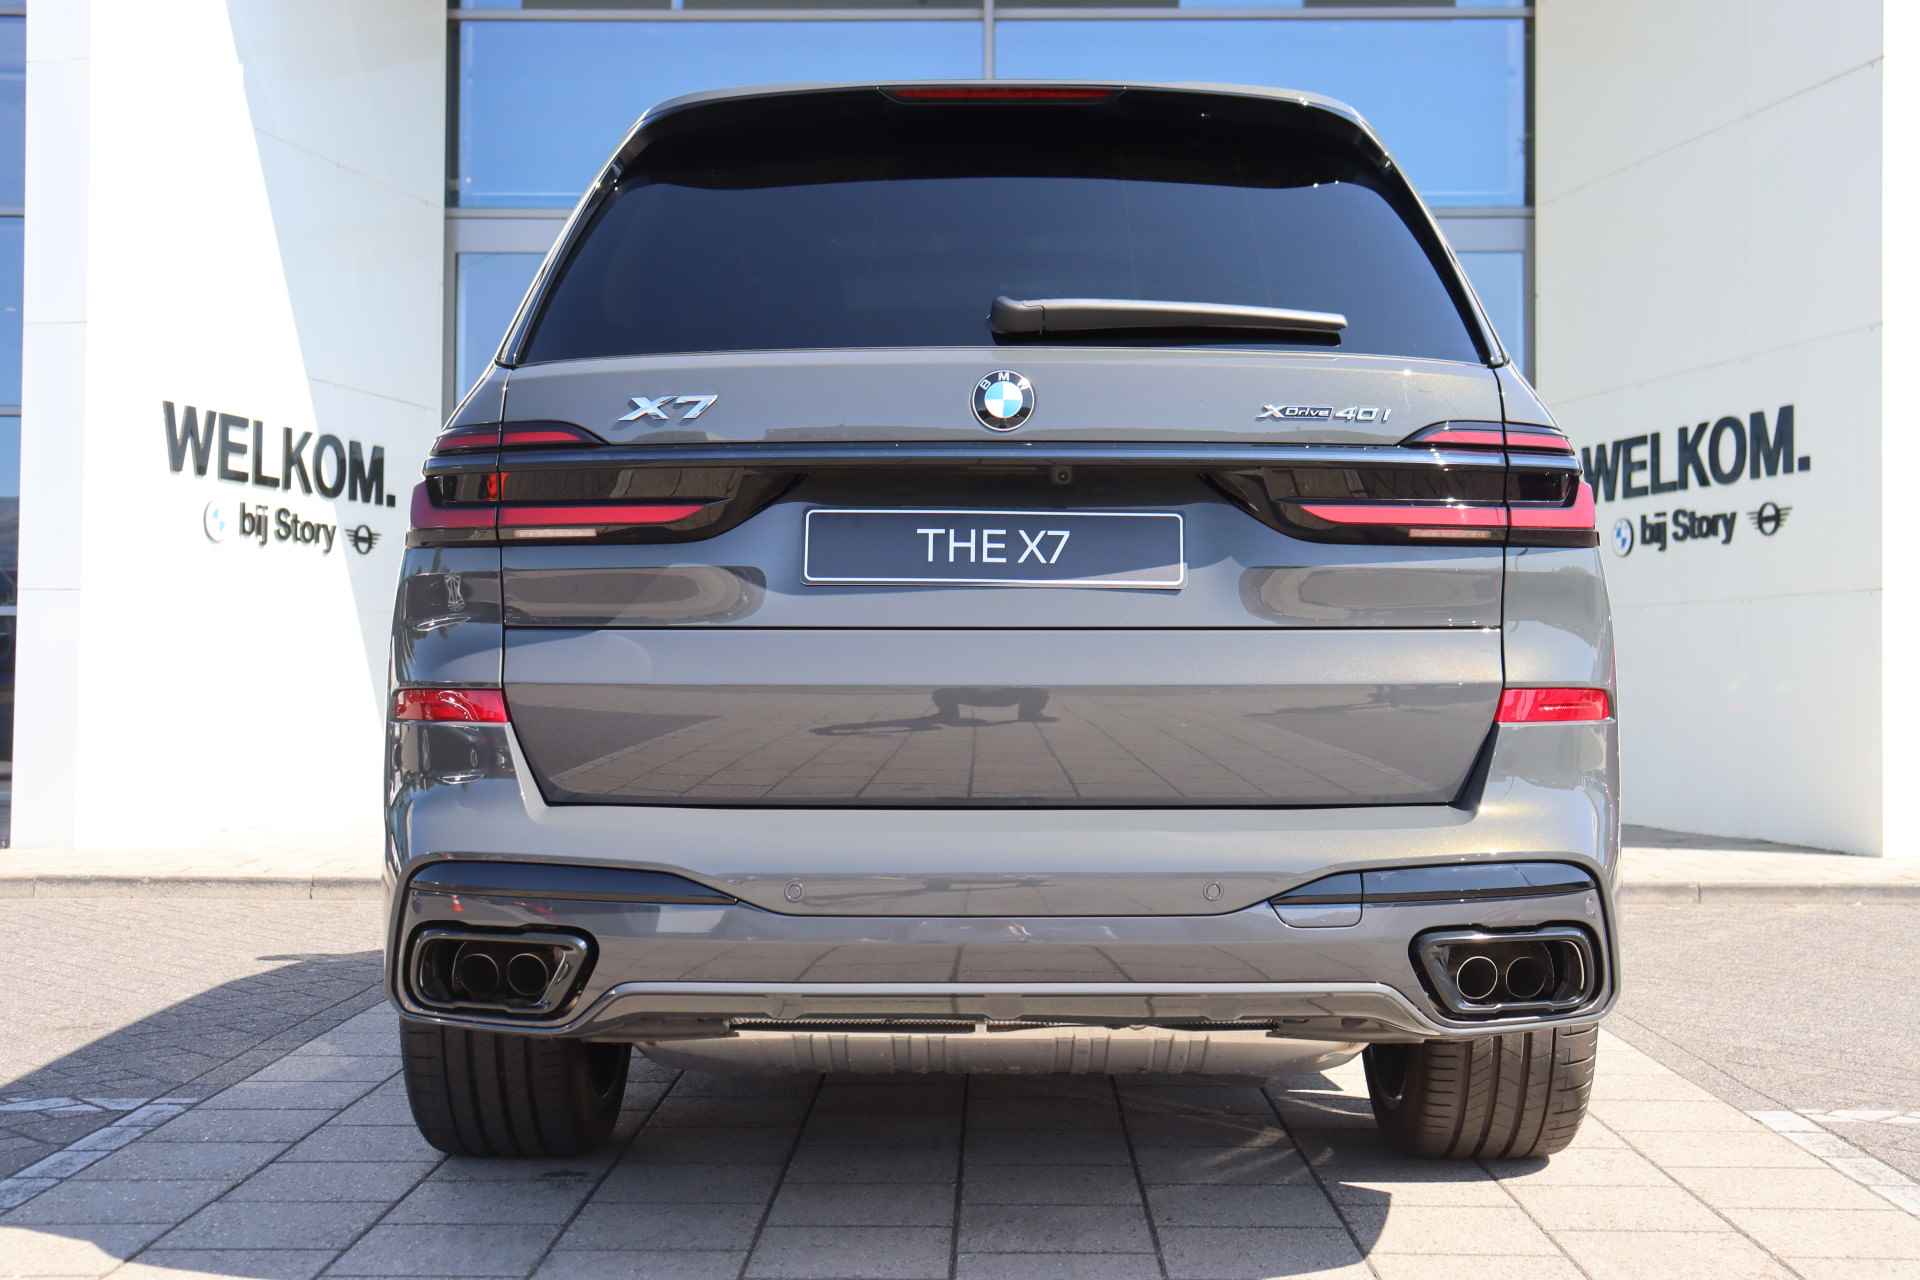 BMW X7 xDrive40i High Executive M Sport Automaat / Panoramadak Sky Lounge / Massagefunctie / Active Steering / Bowers & Wilkins / Trekhaak / Soft-Close / Driving Assistant Professional - 10/44